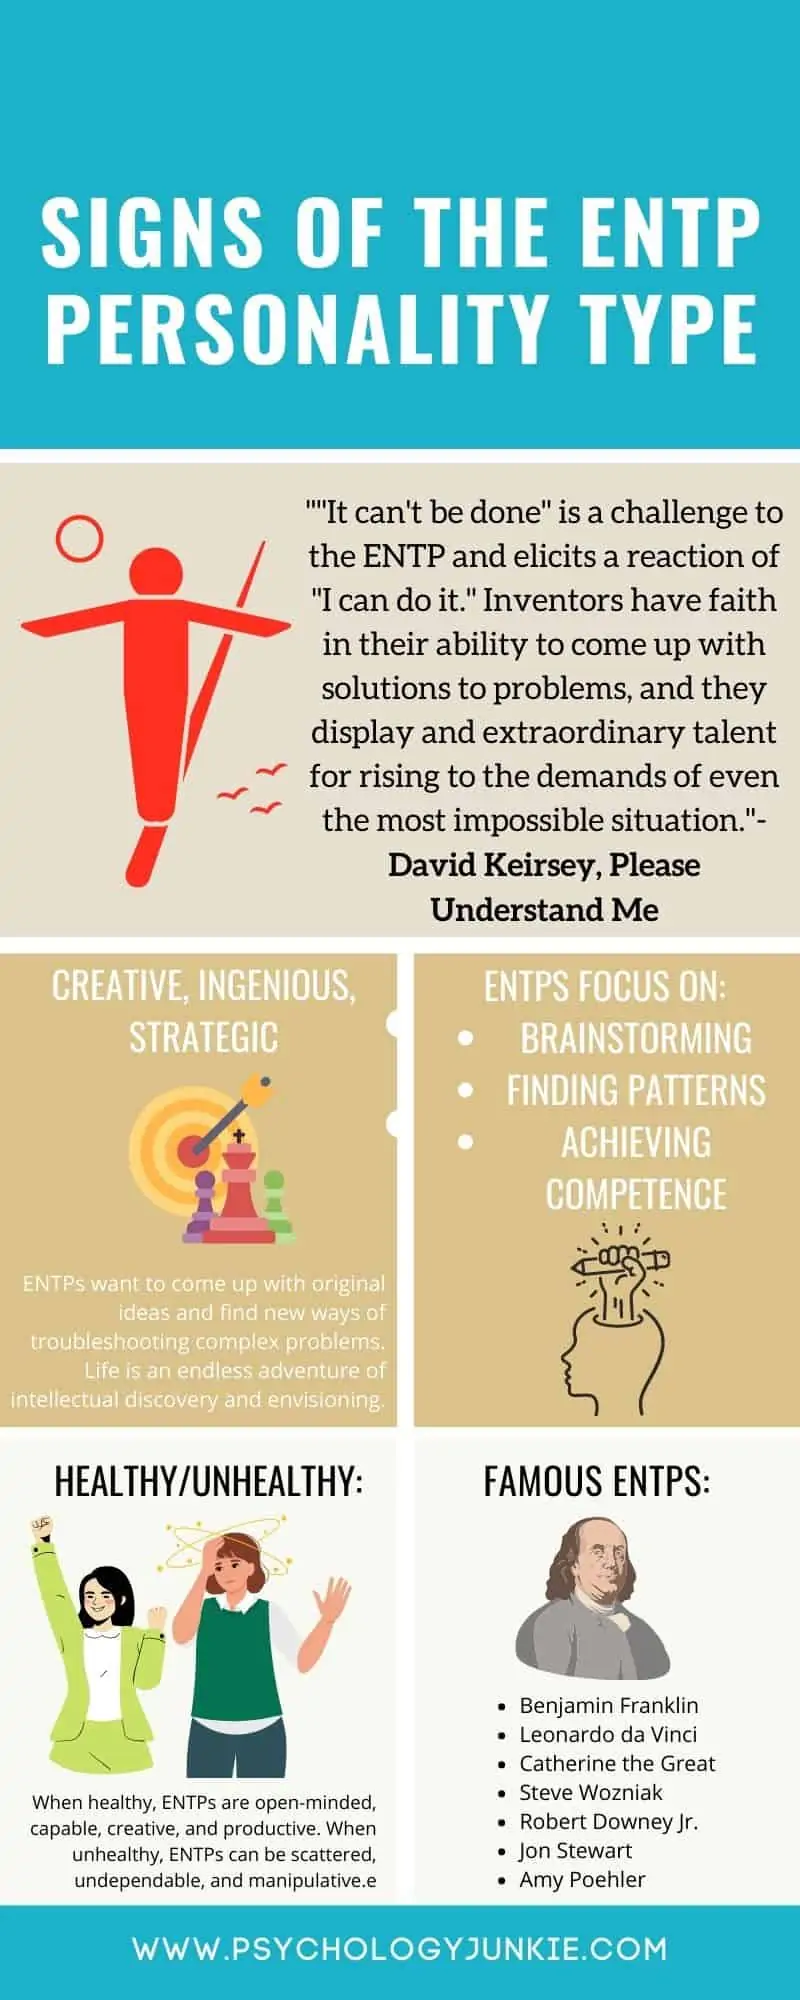 ENTP infographic describing some of the chore traits of ENTPs. #ENTP #MBTI #Personality